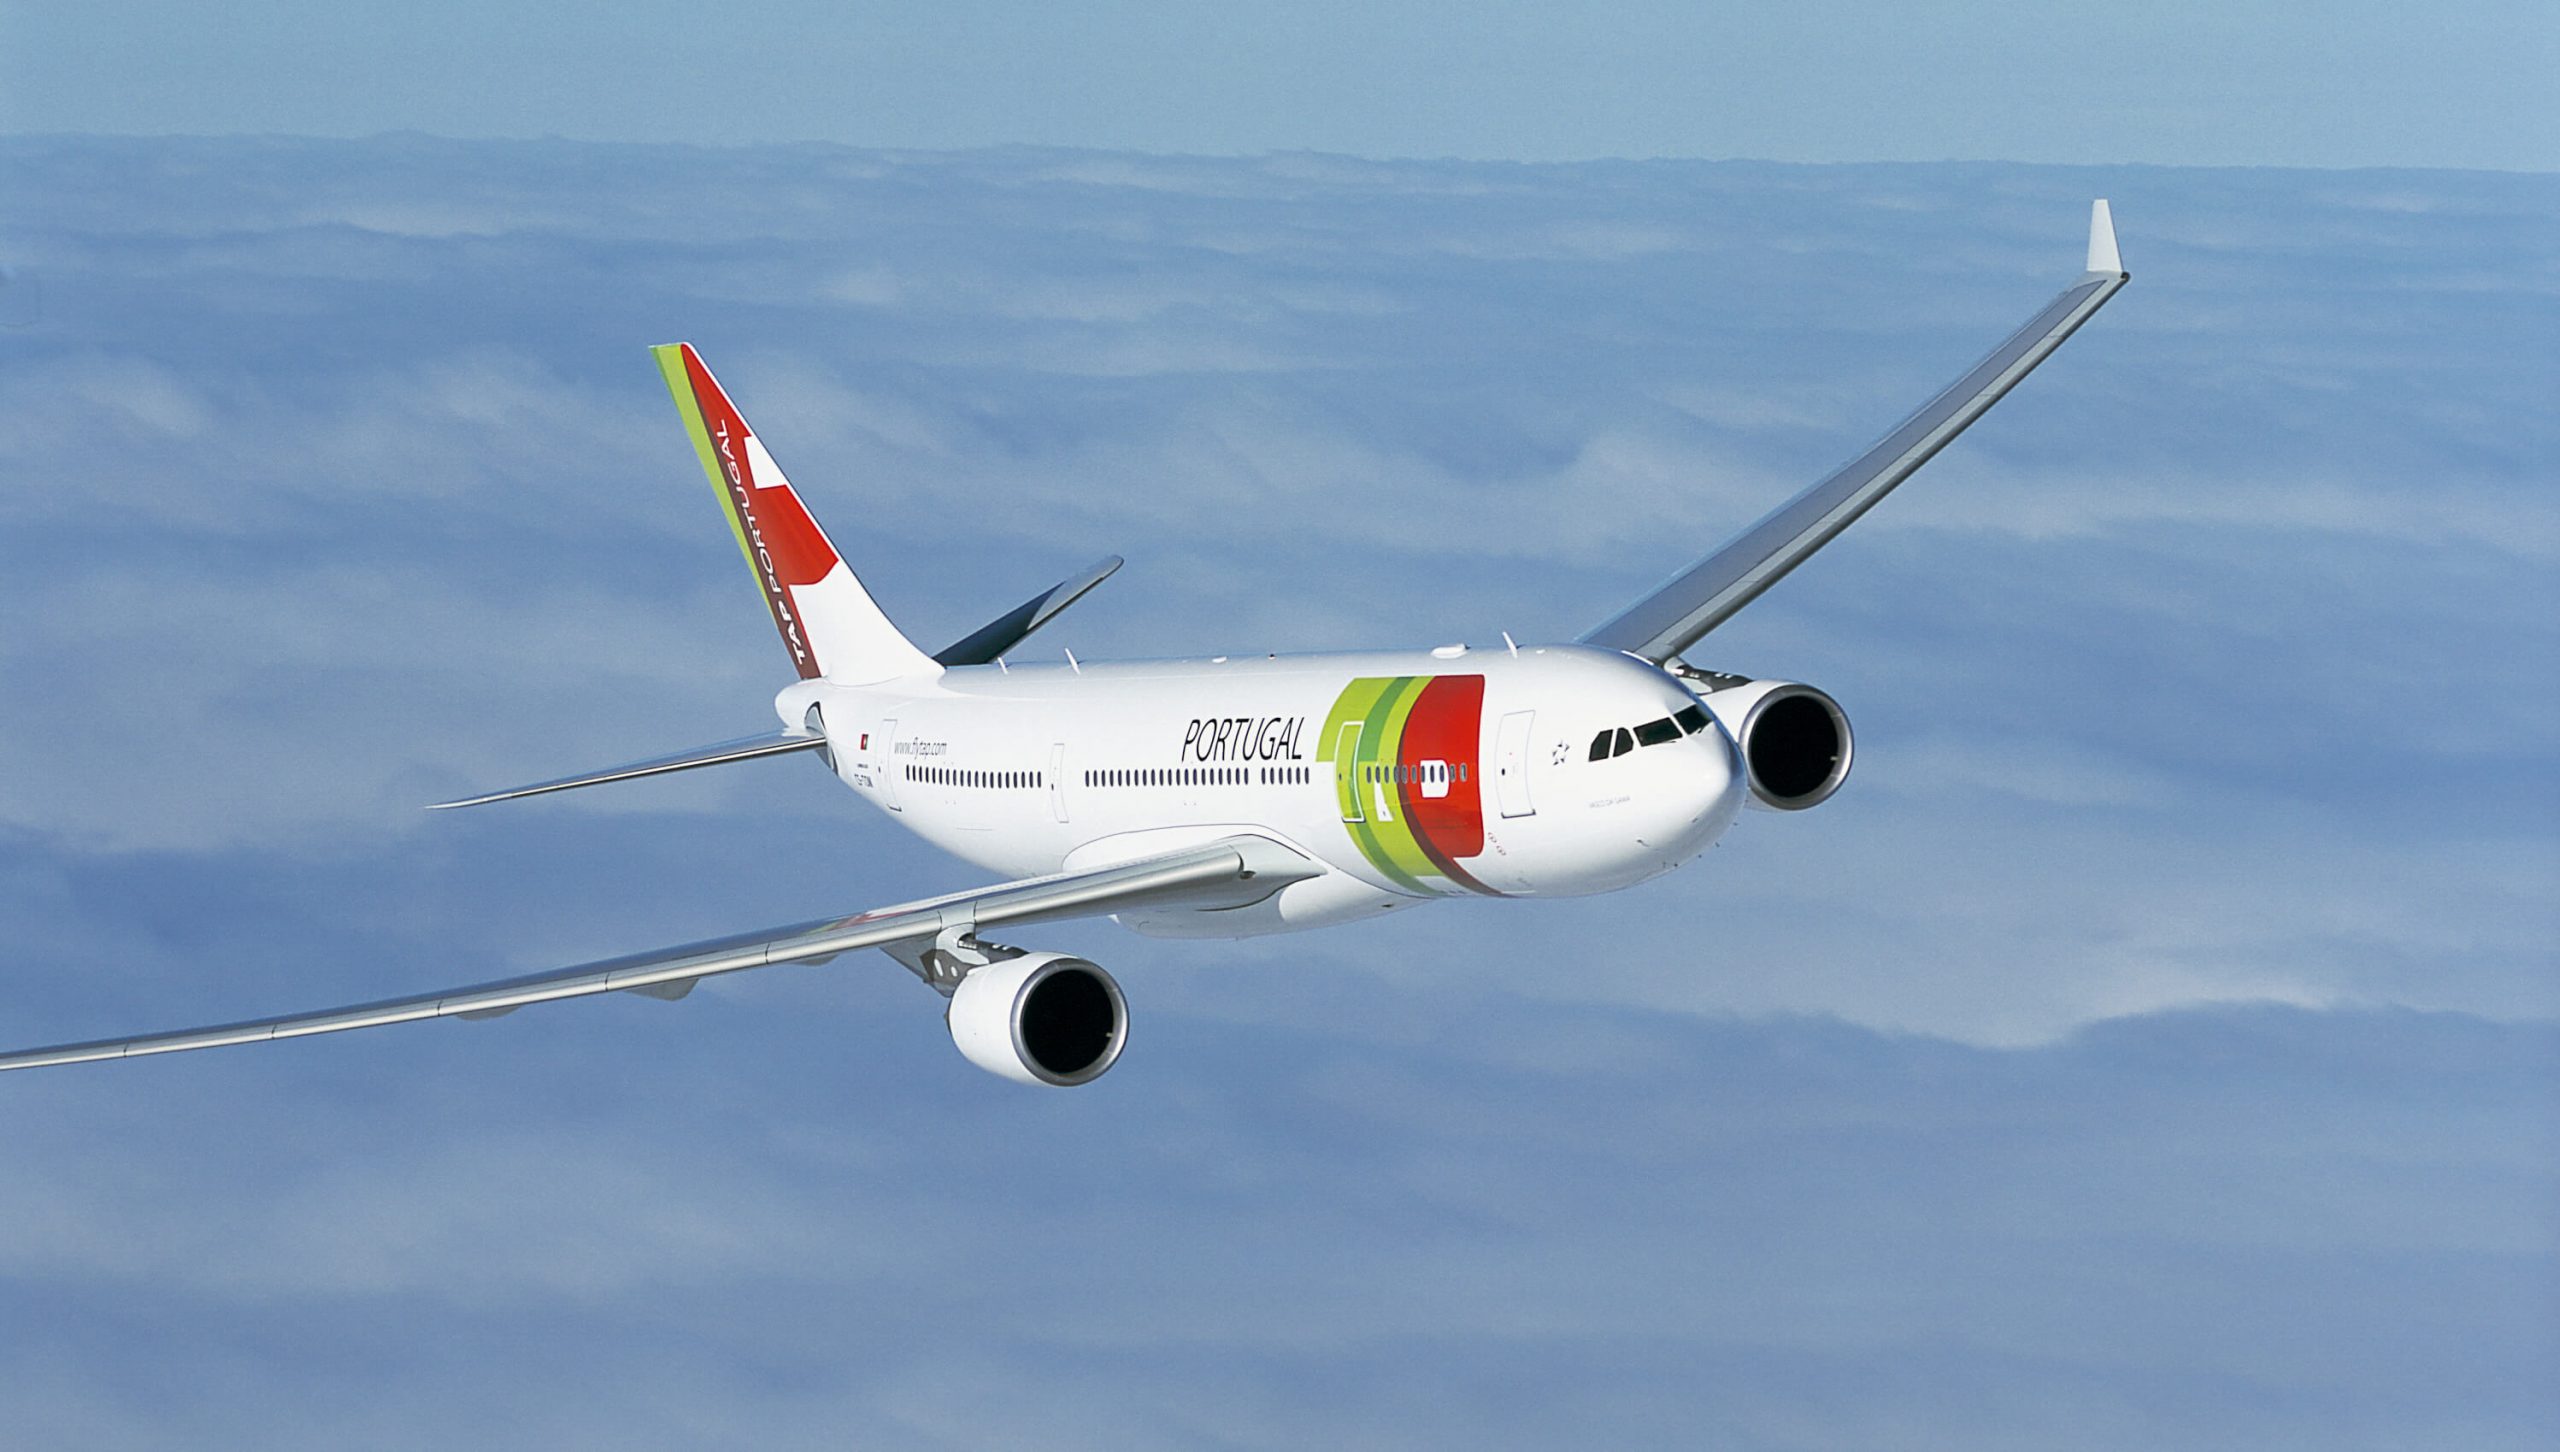 TAP Portugal launches new service to Banjul, Gambia